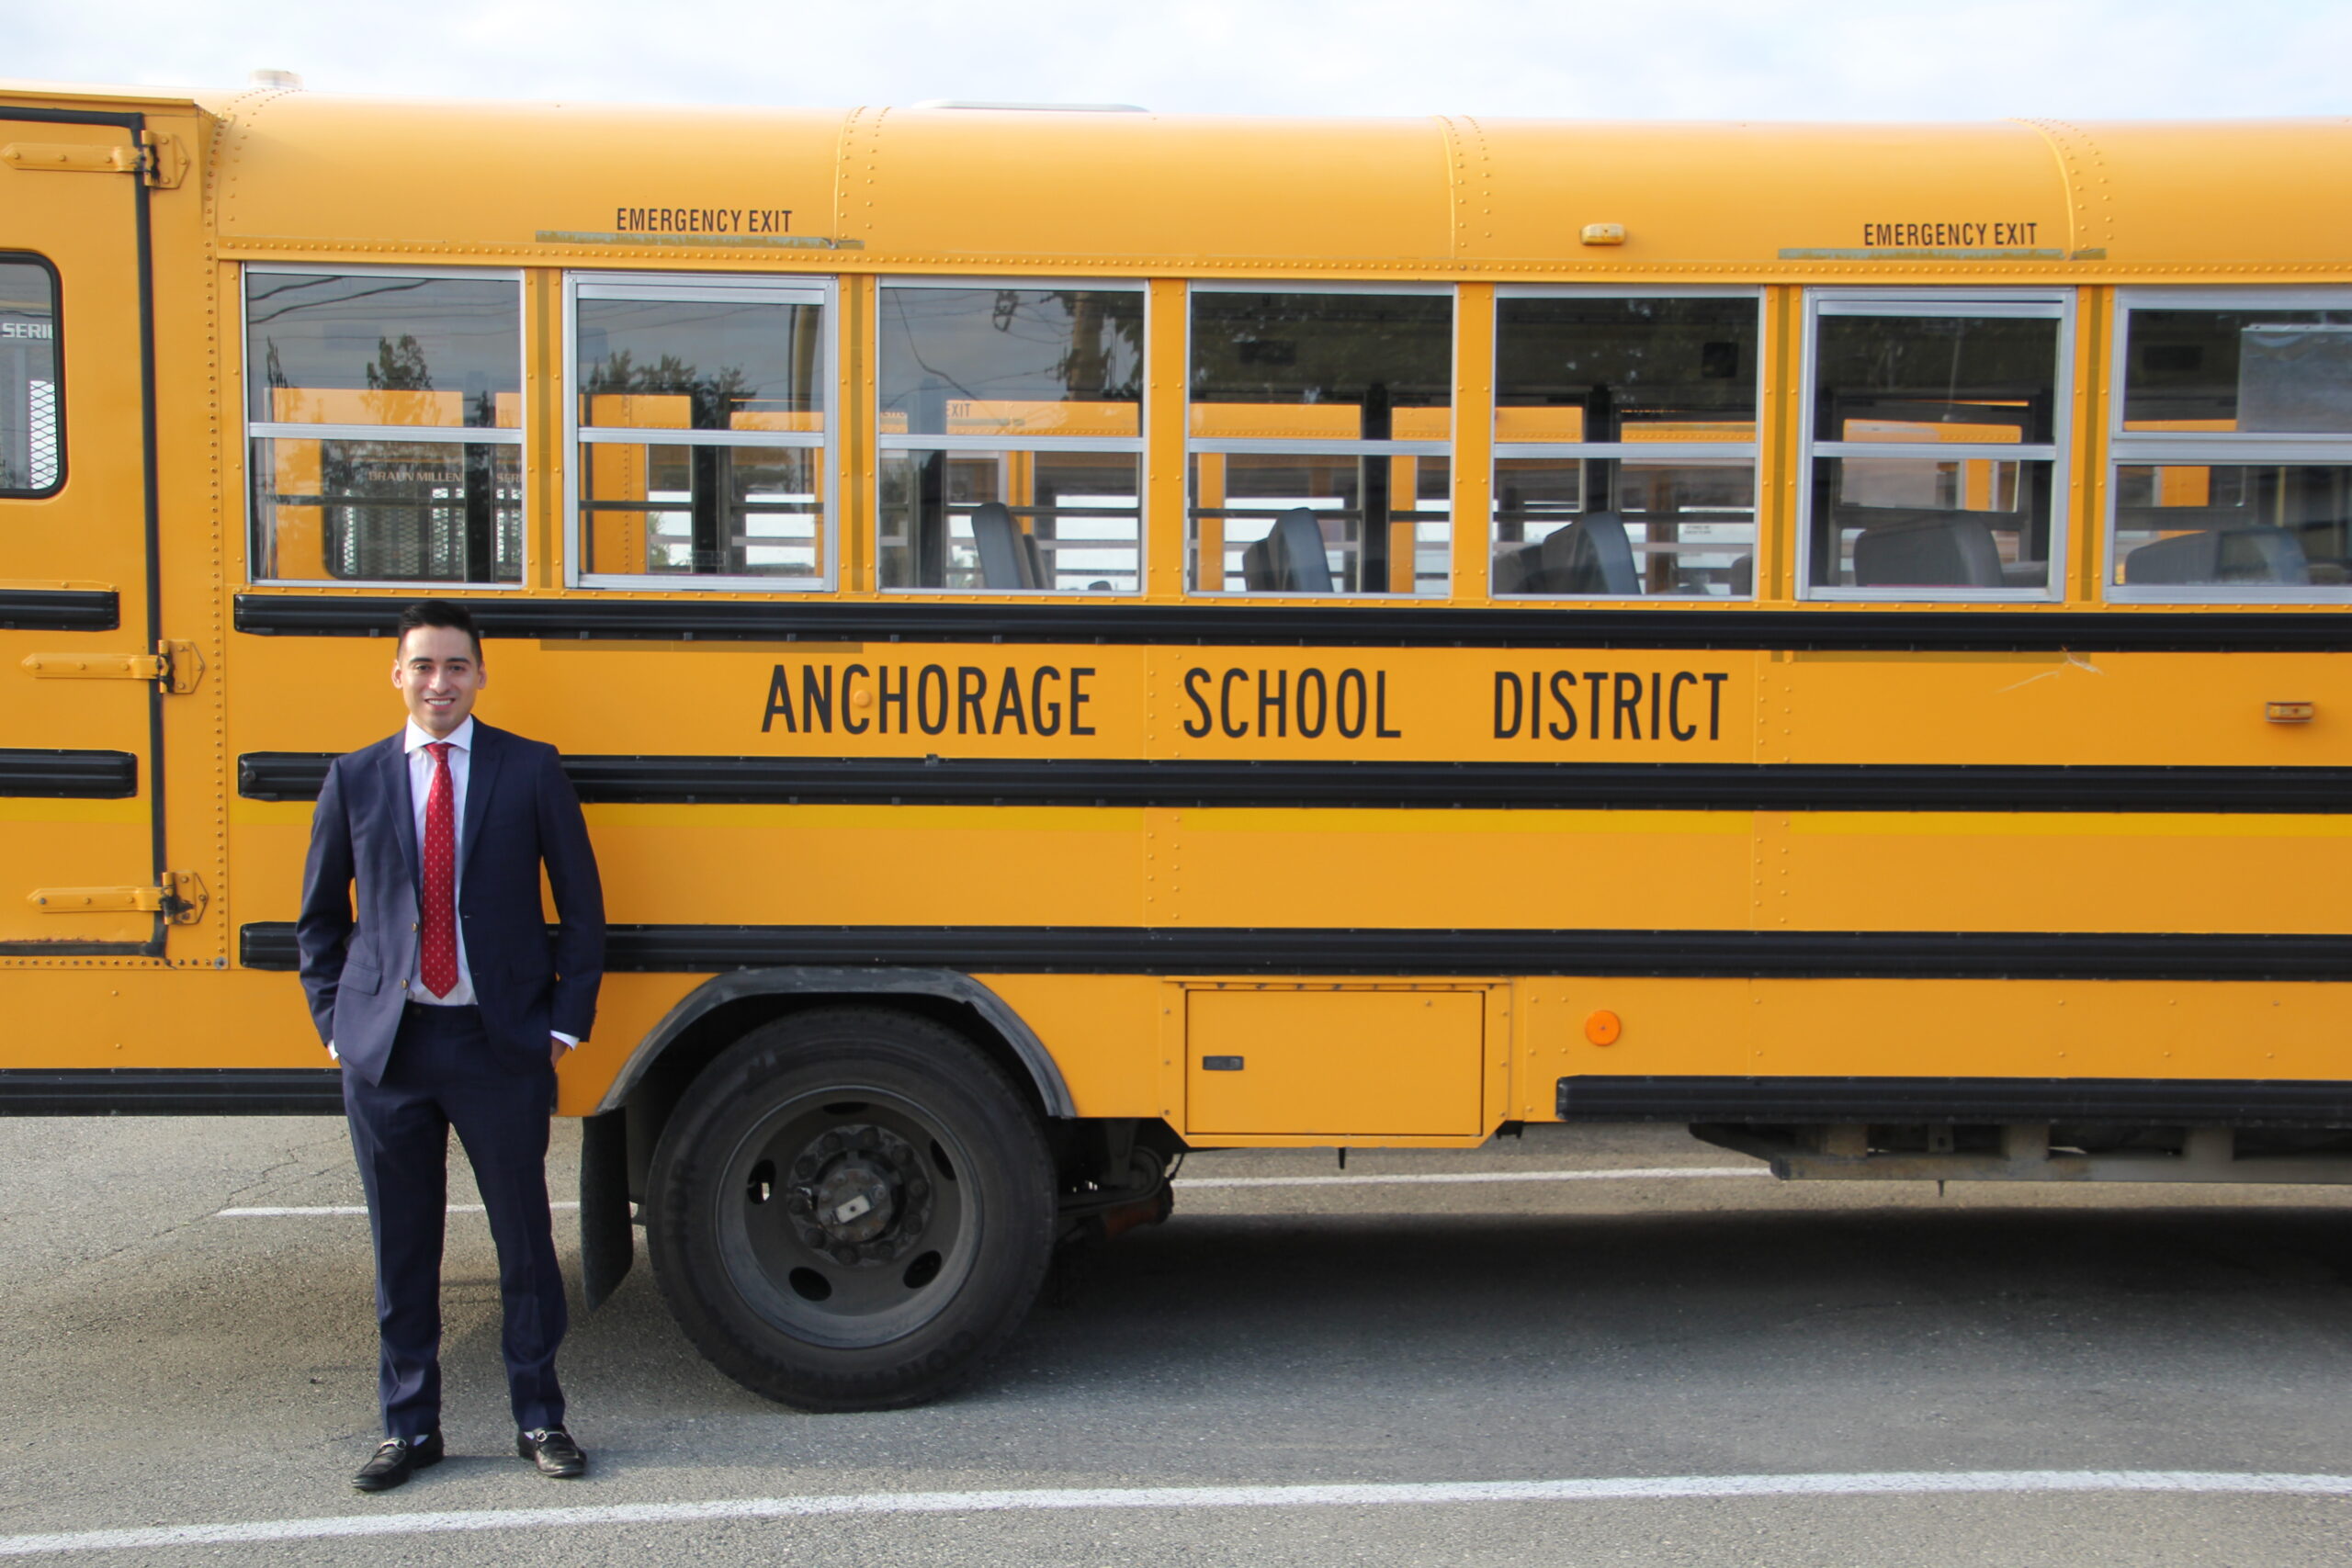 A man stands in front of a yellow Anchorage School District bus wearing a suit with a red tie.